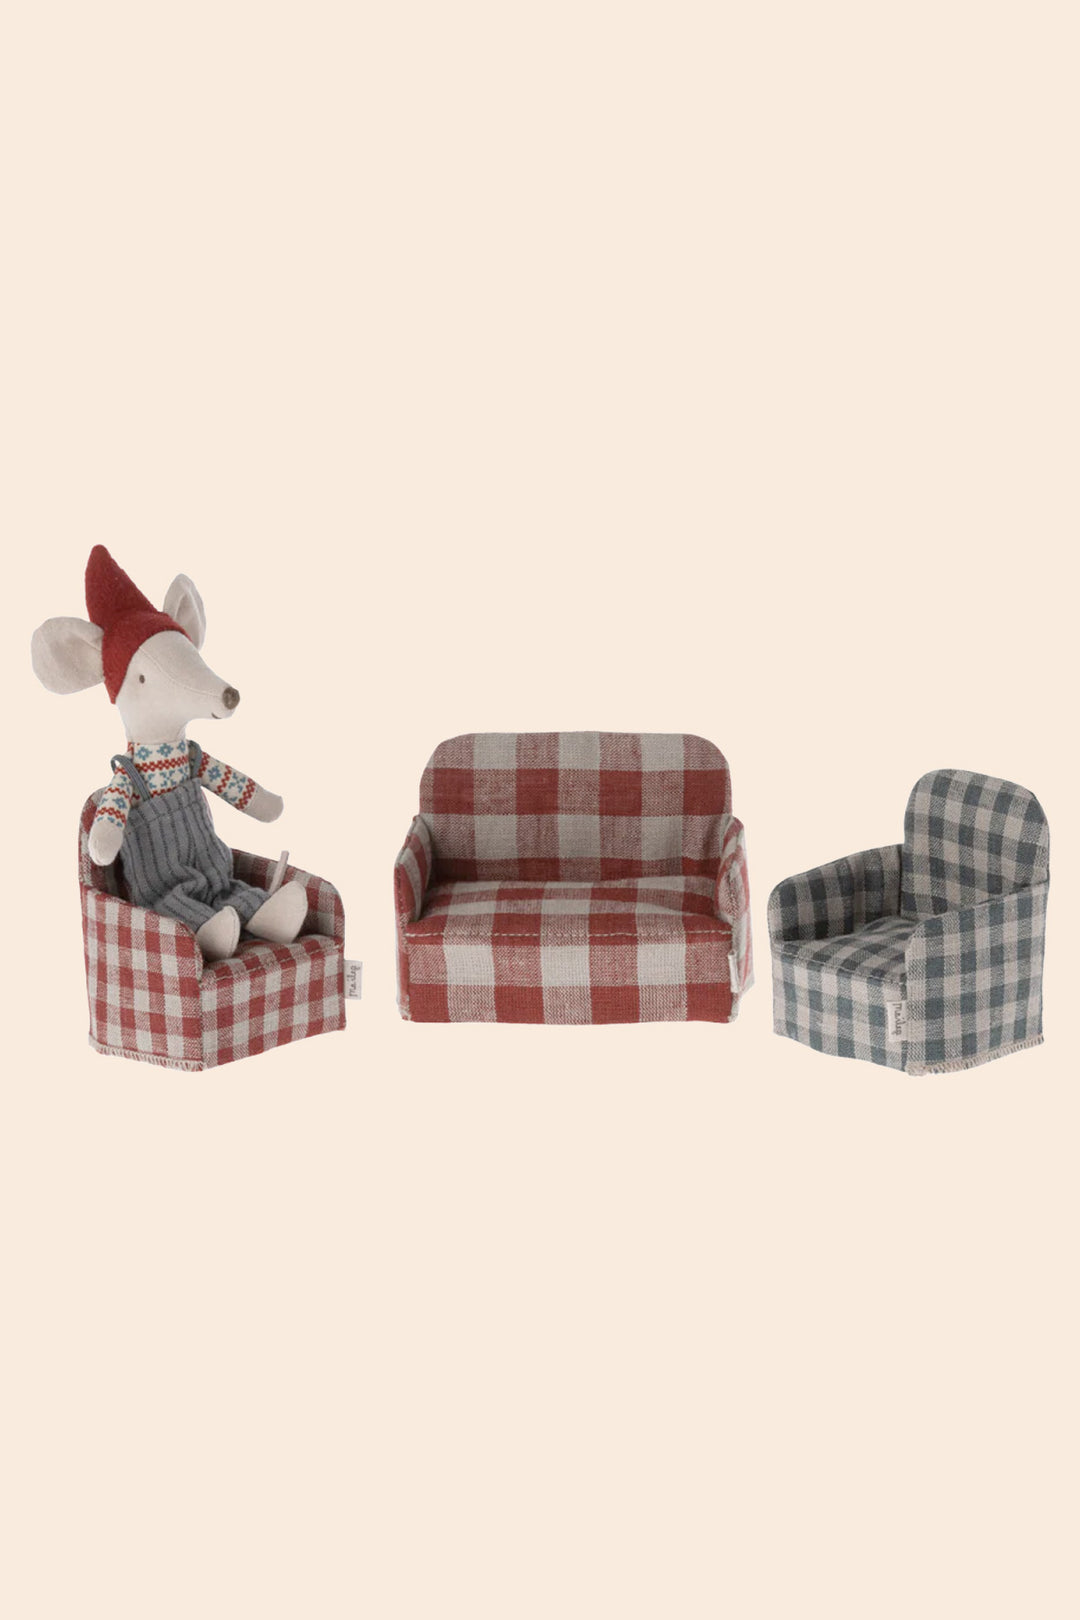 Maileg Chair Mouse - Red